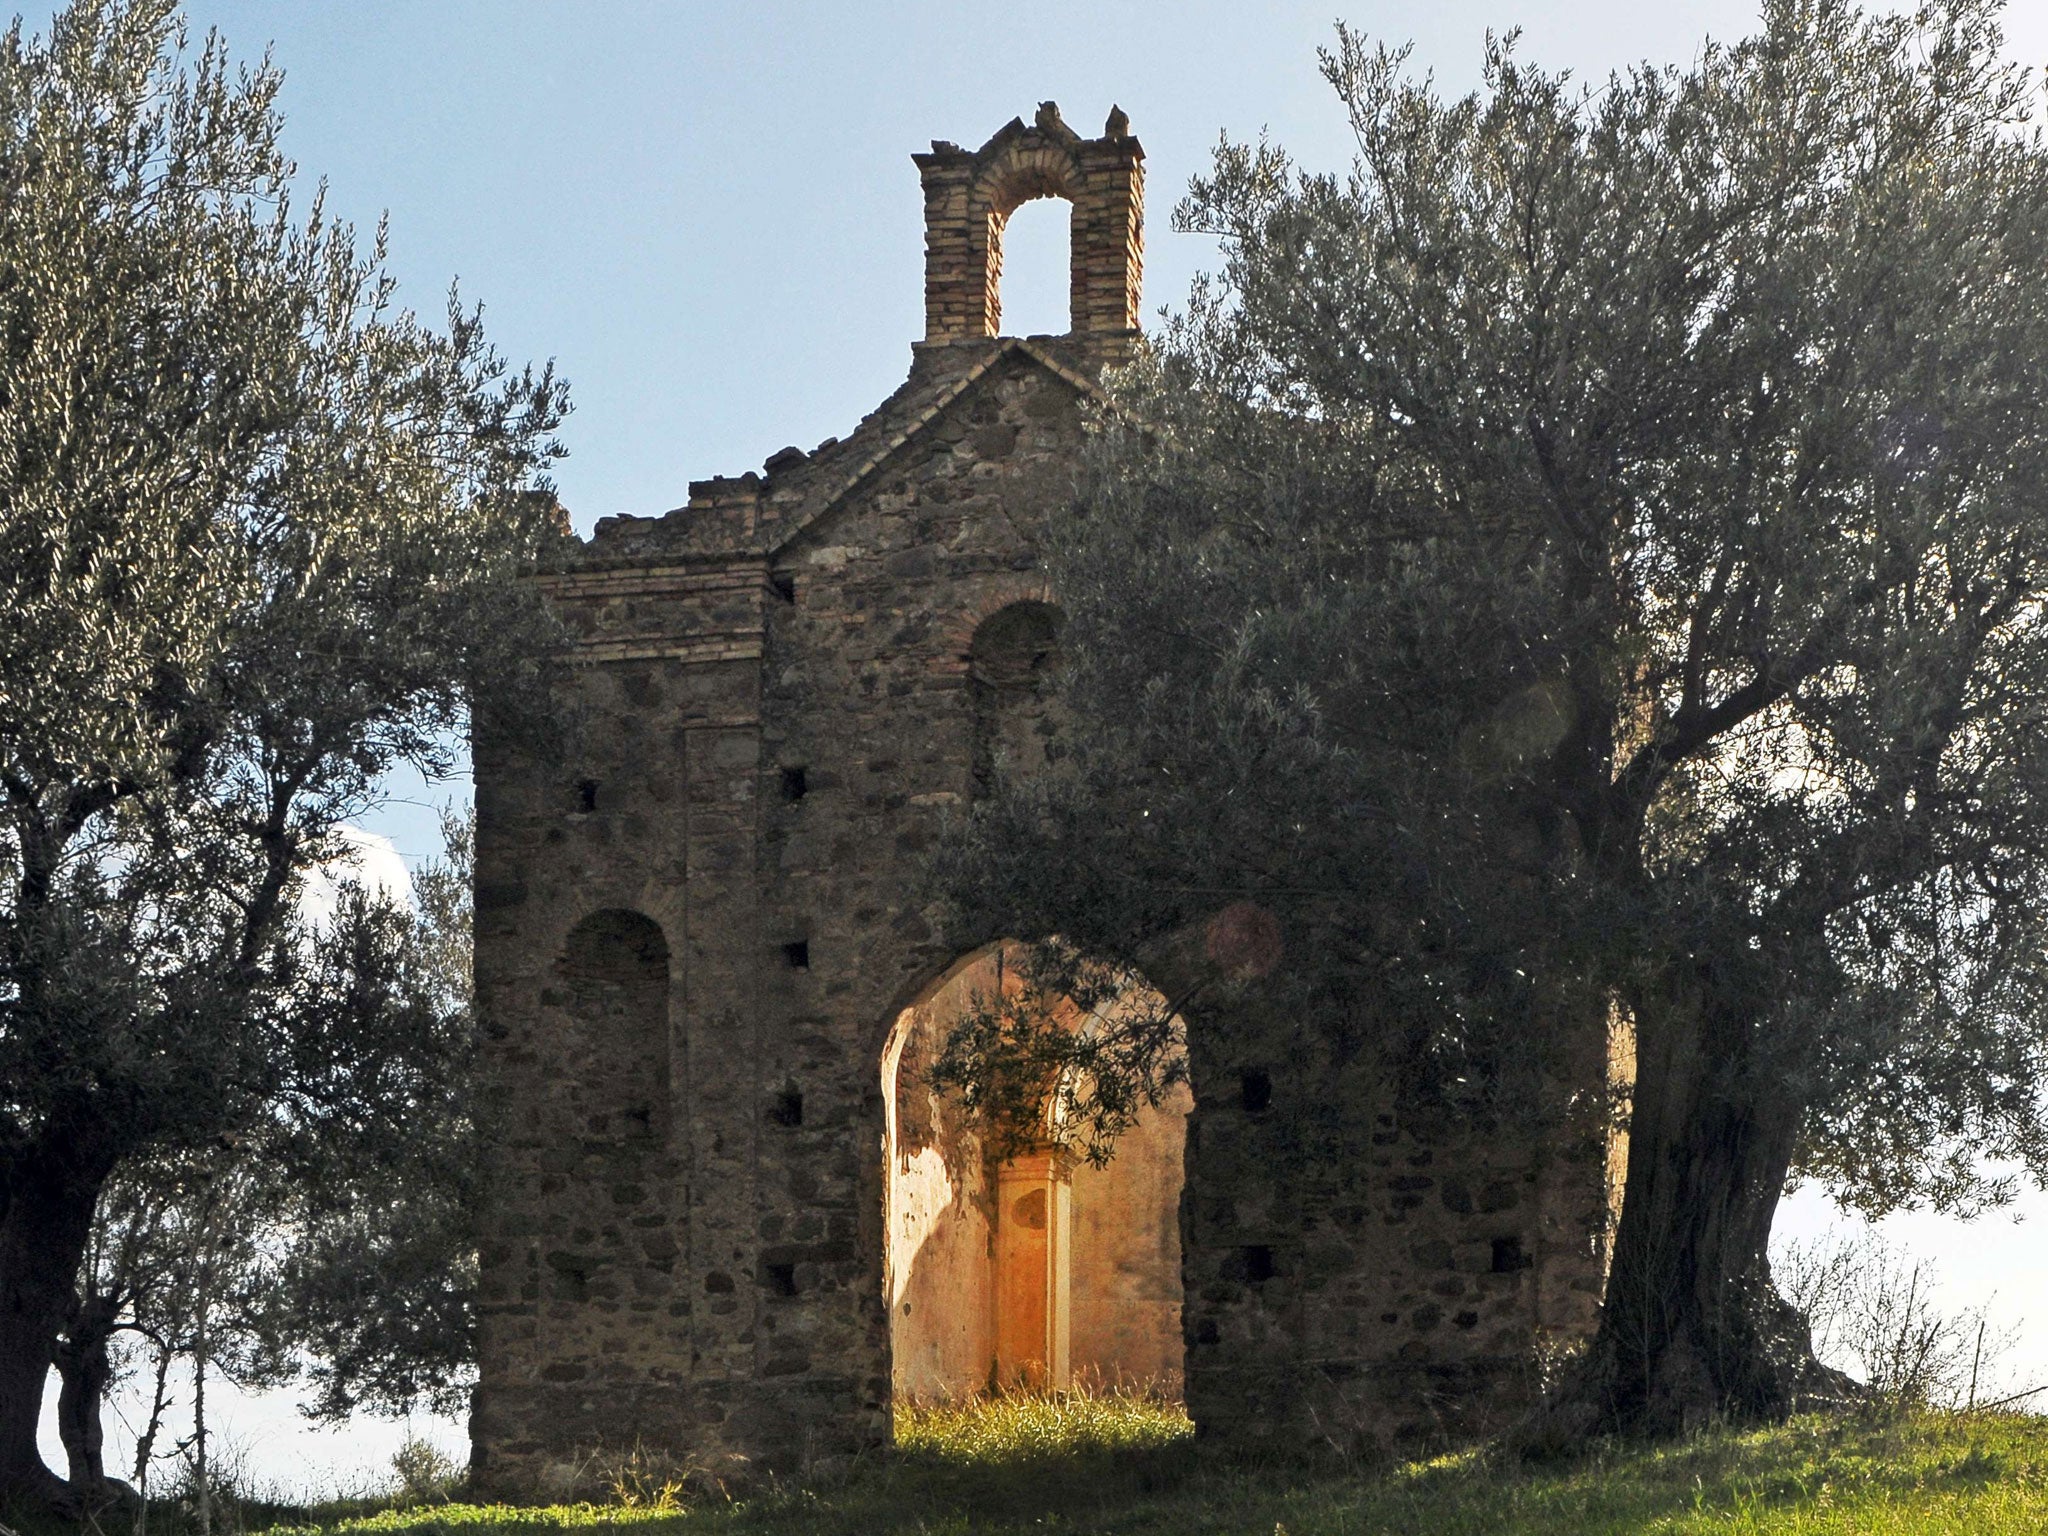 The church in Montegiordano, Calabria, before it was dismantled